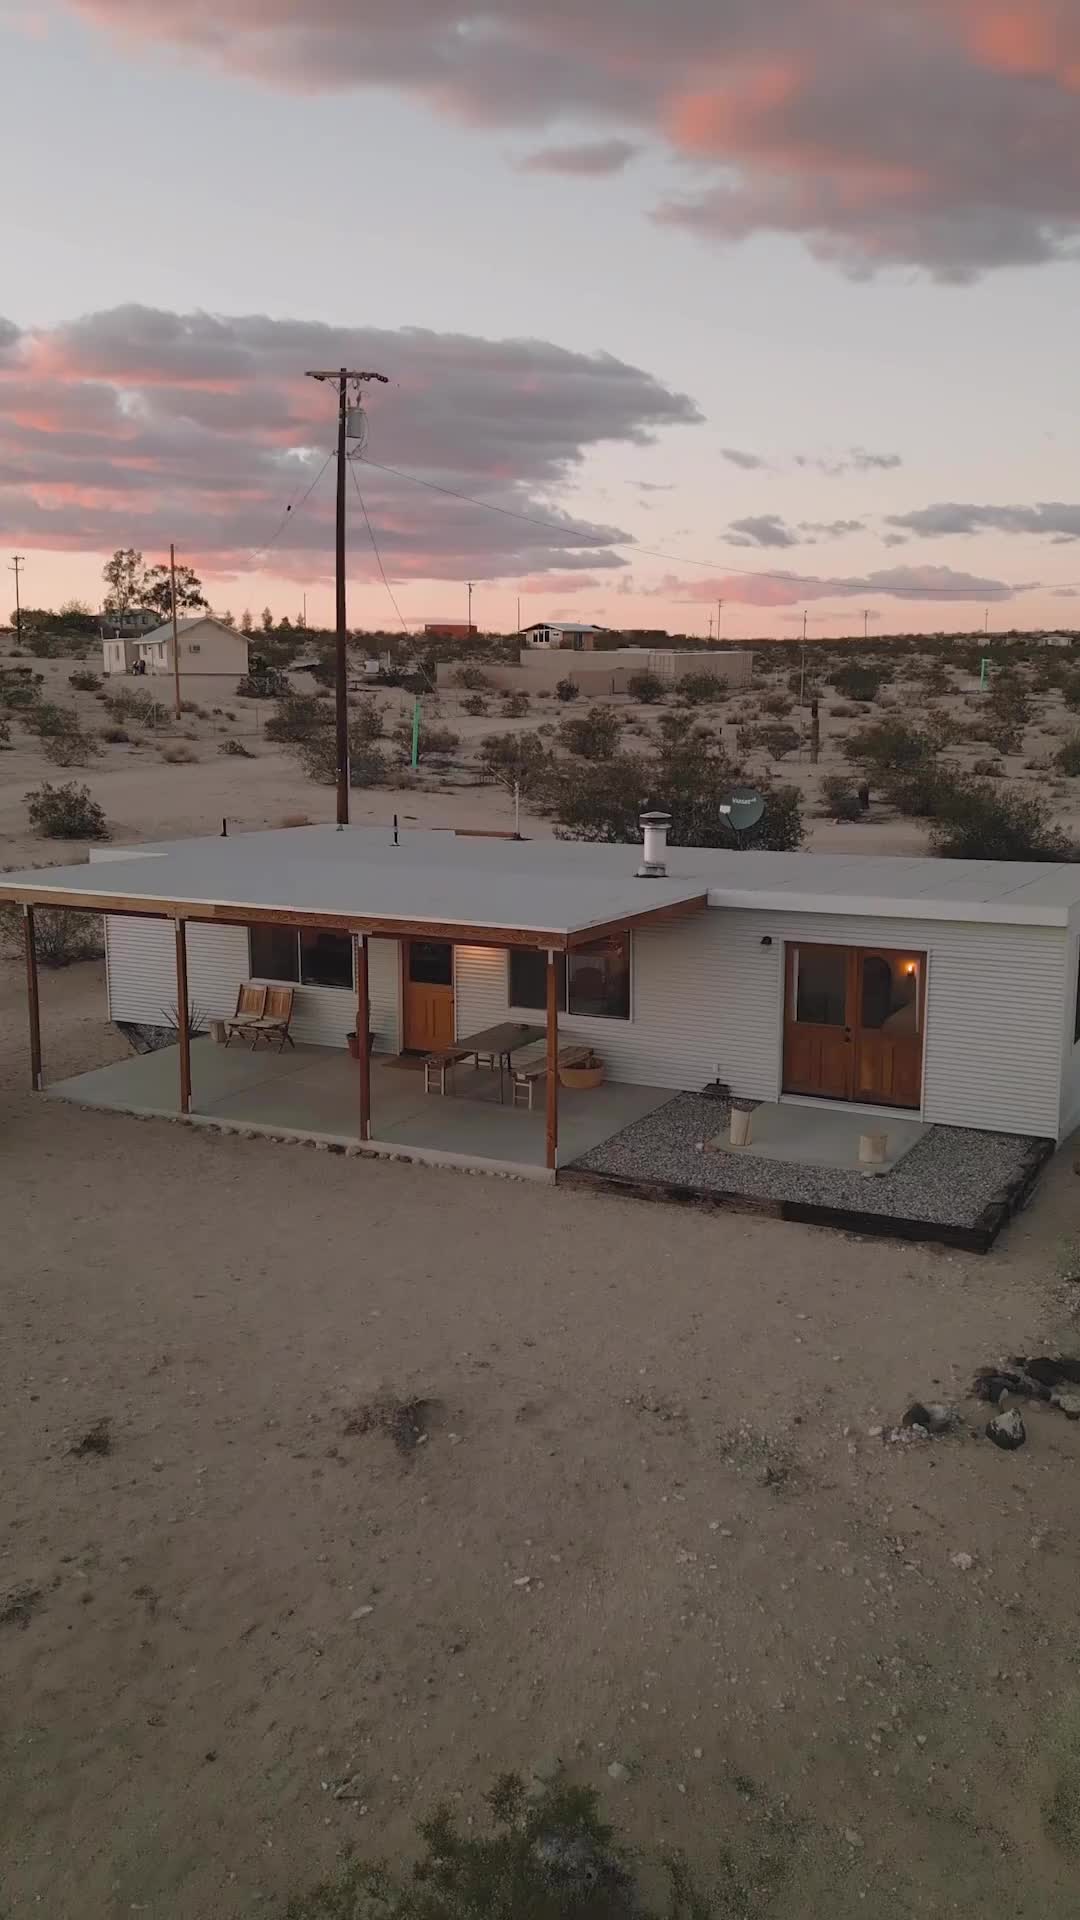 Win a Free Stay at a Joshua Tree Desert Cabin! 🌵